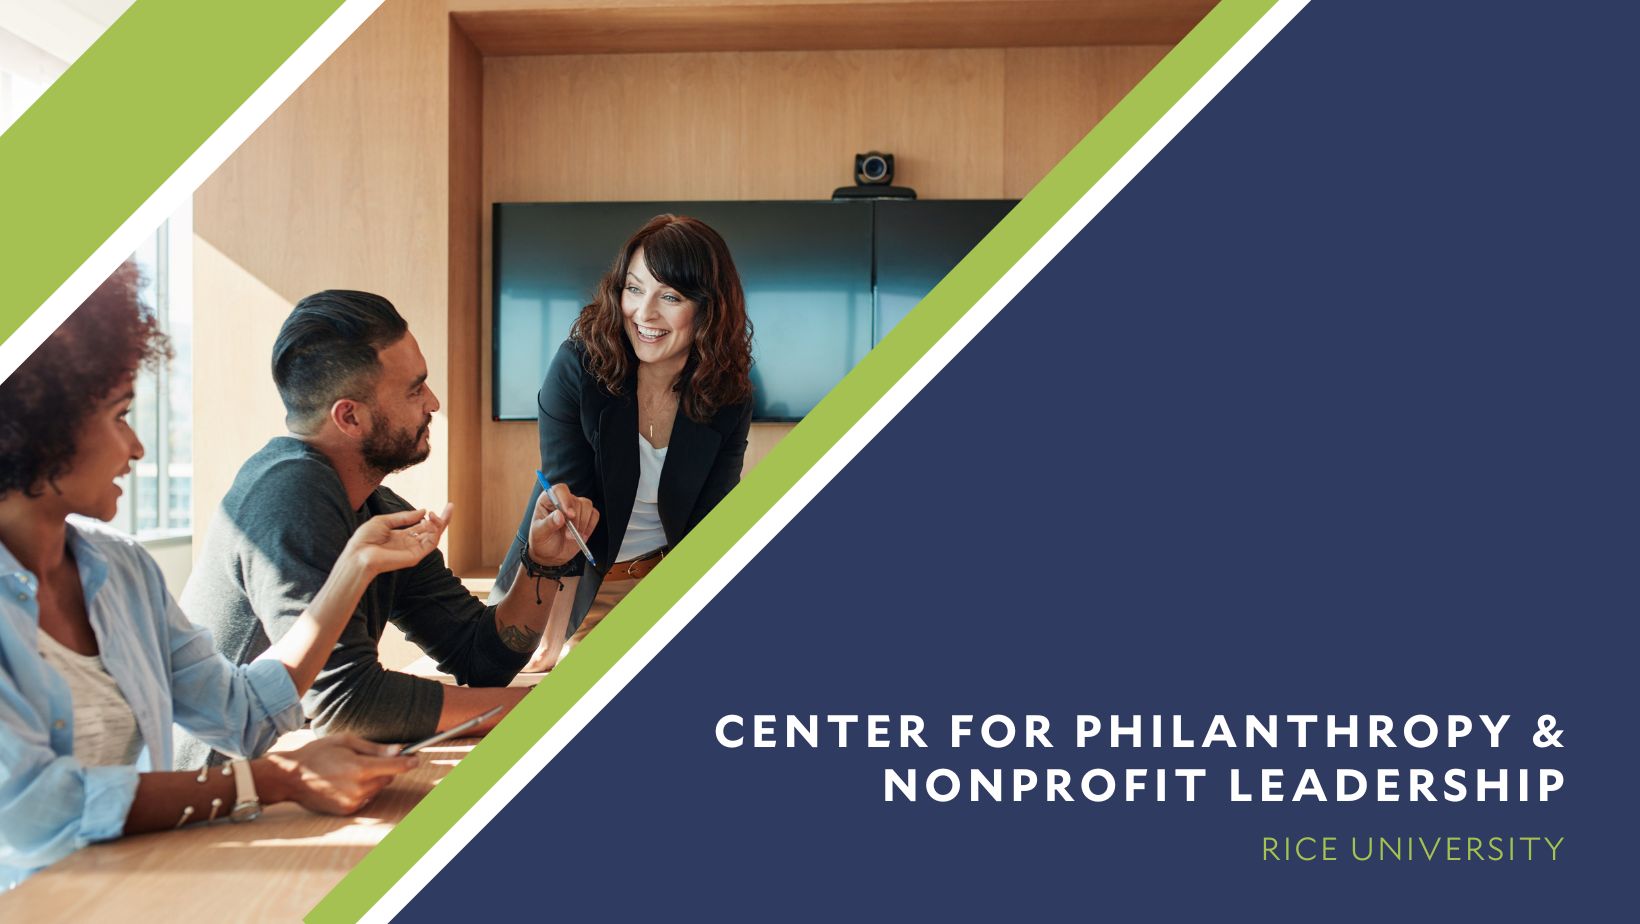 Professionals working together,  right-aligned text of "Center for Philanthropy & Nonprofit Leadership Rice University"